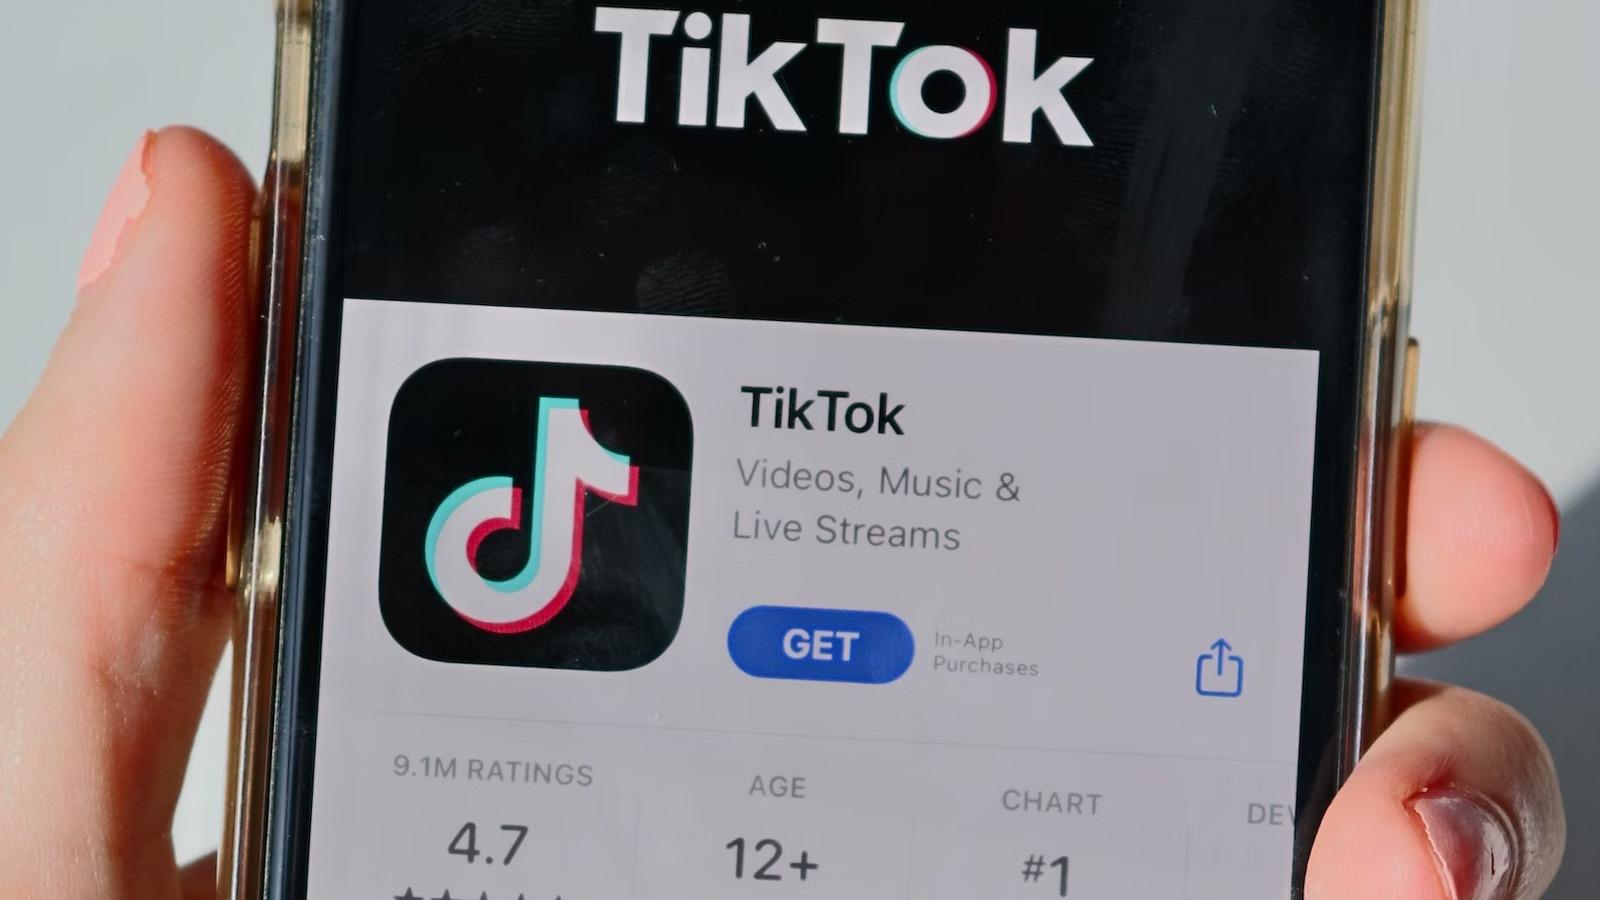 TikTok reportedly eyeing ad-free viewing experience with new premium subscription